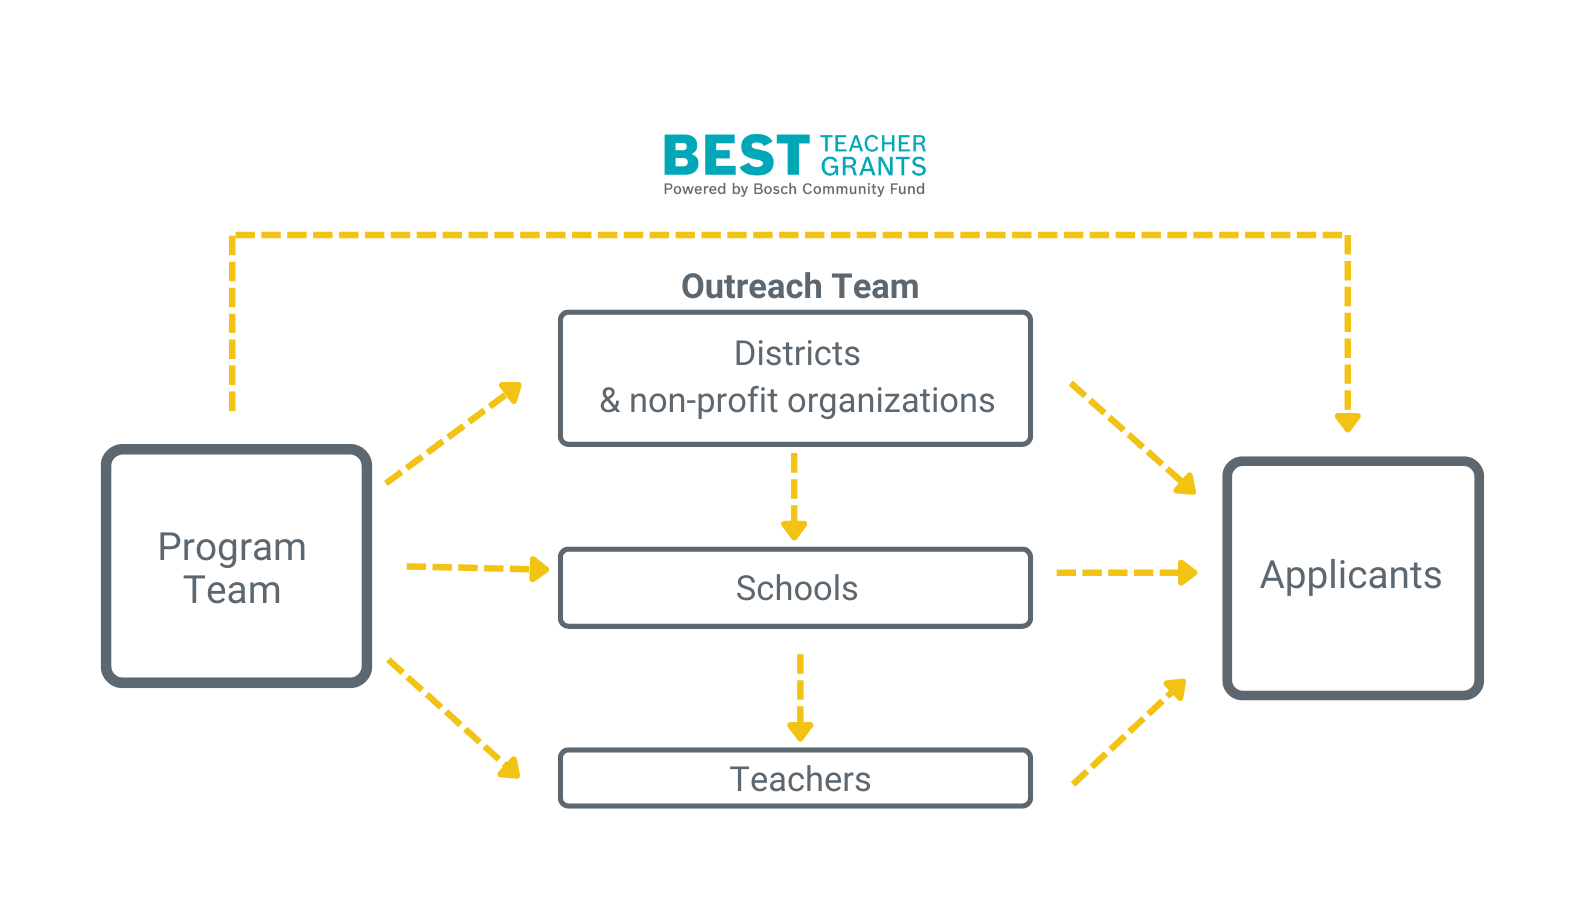 Flowchart shows the flow of information for the BEST outreach model; information flows from the program team to applicants and to the outreach team, as well as from the outreach team to applicants.